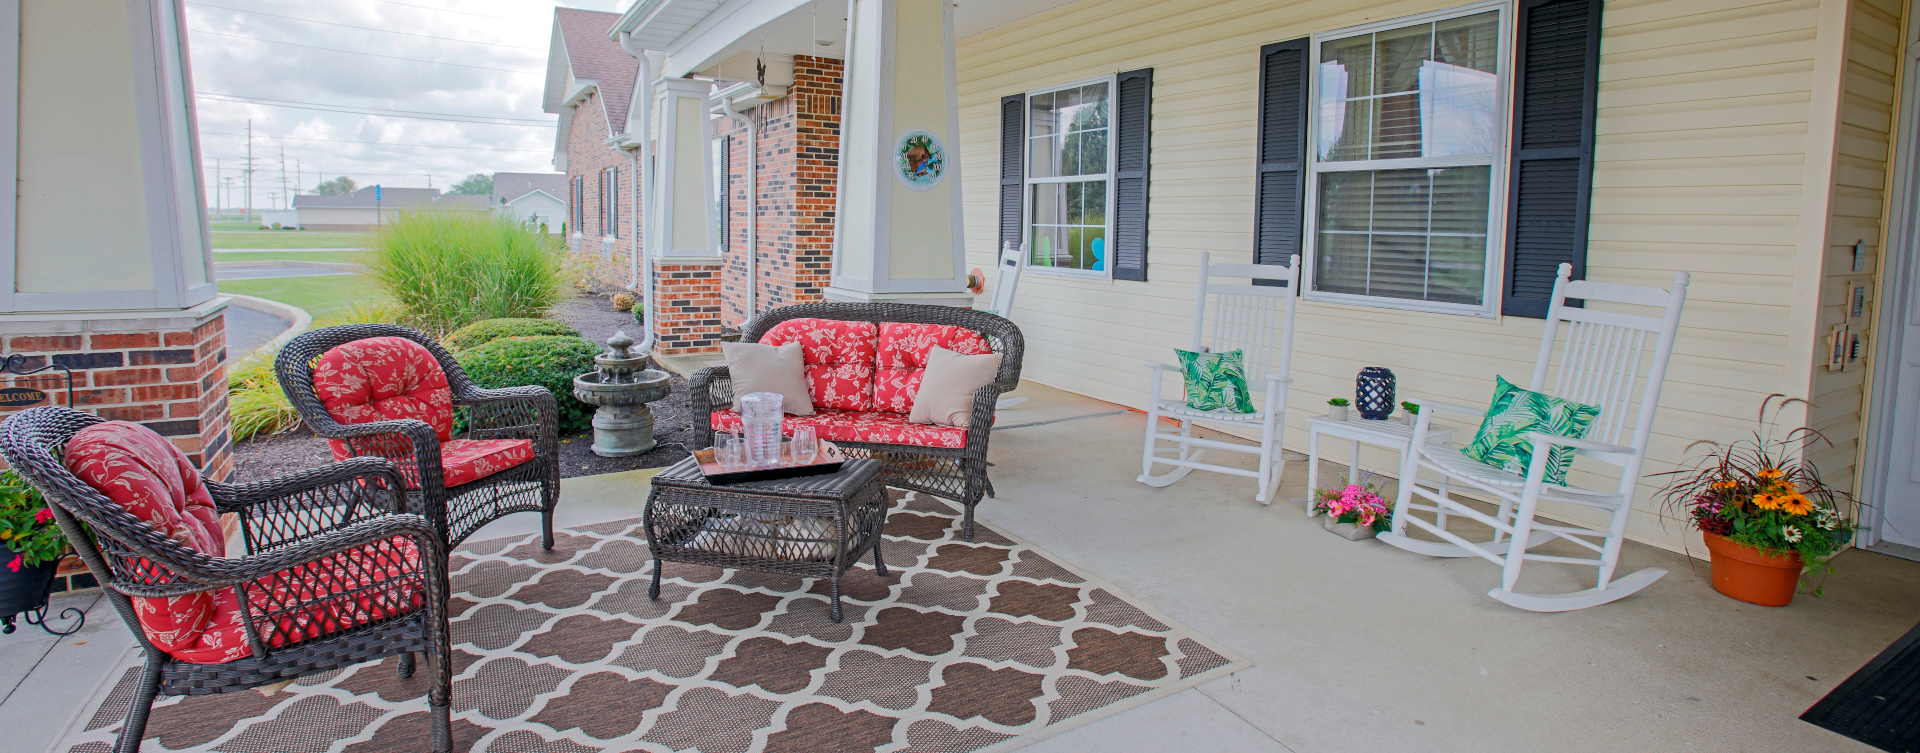 Enjoy conversations with friends on the porch at Bickford of Wabash